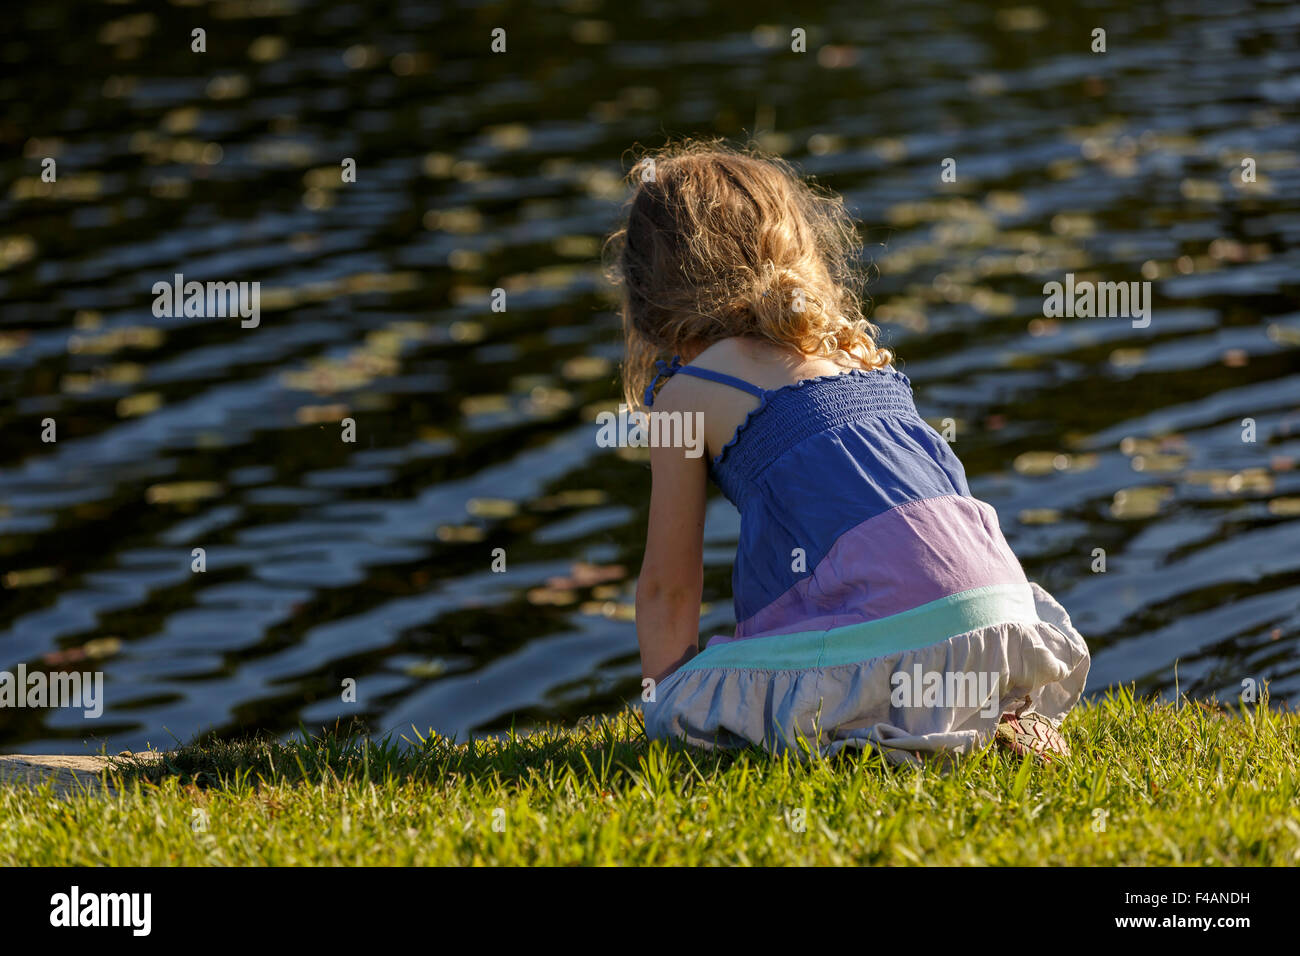 Young girl with loose long hair sitting with back to camera on grass at waters edge Stock Photo